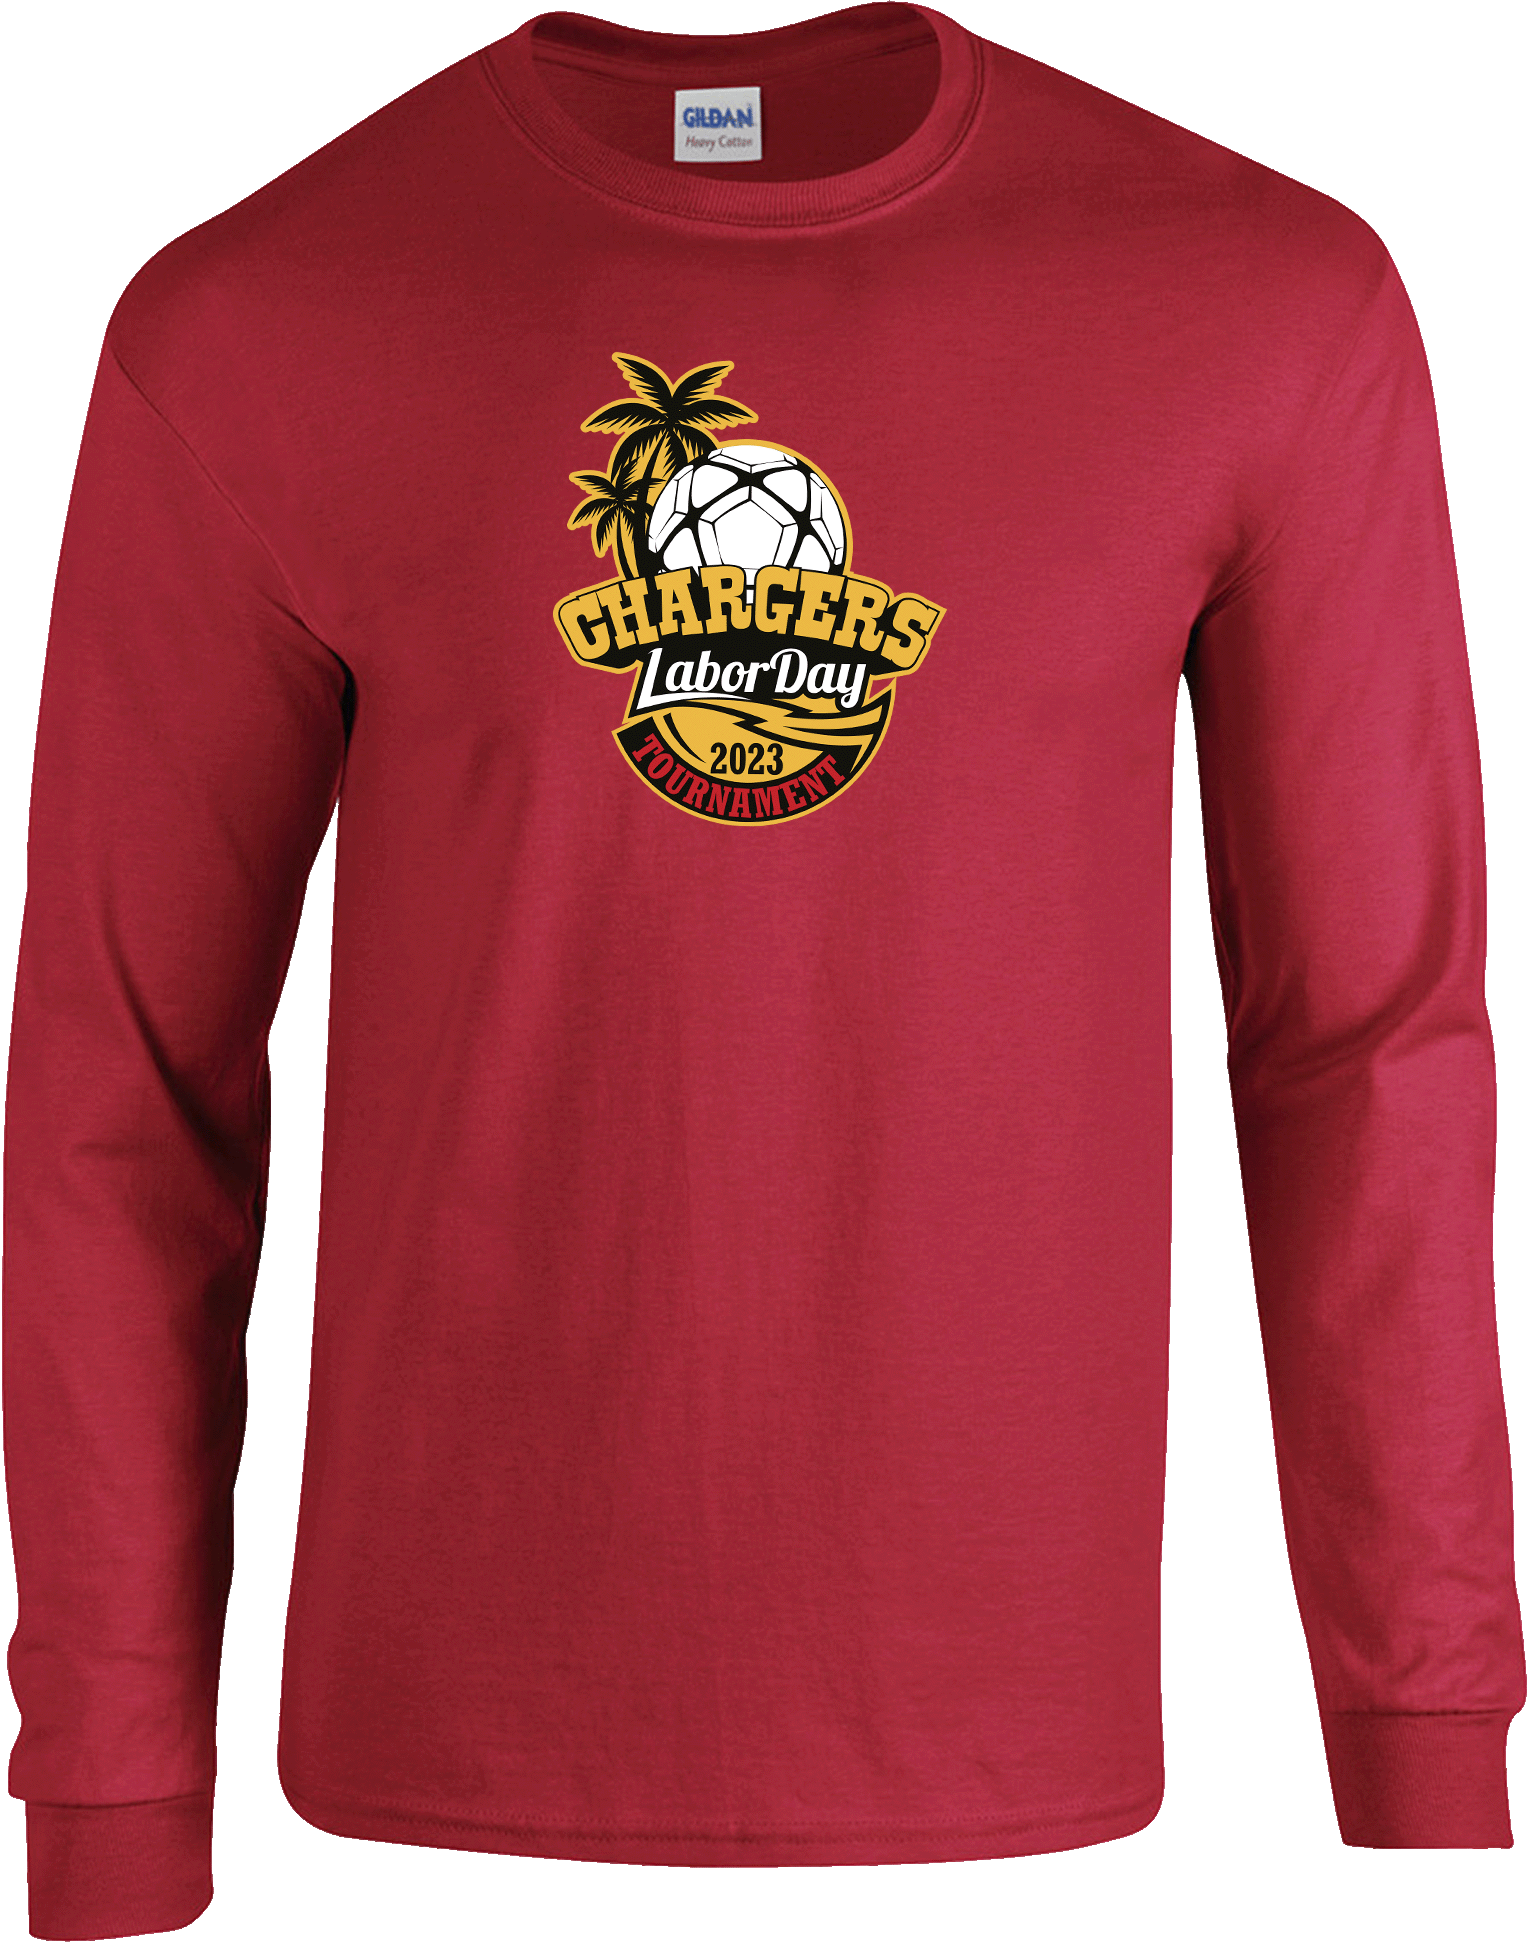 Long Sleeves - 2023 Chargers Labor Day Tournament